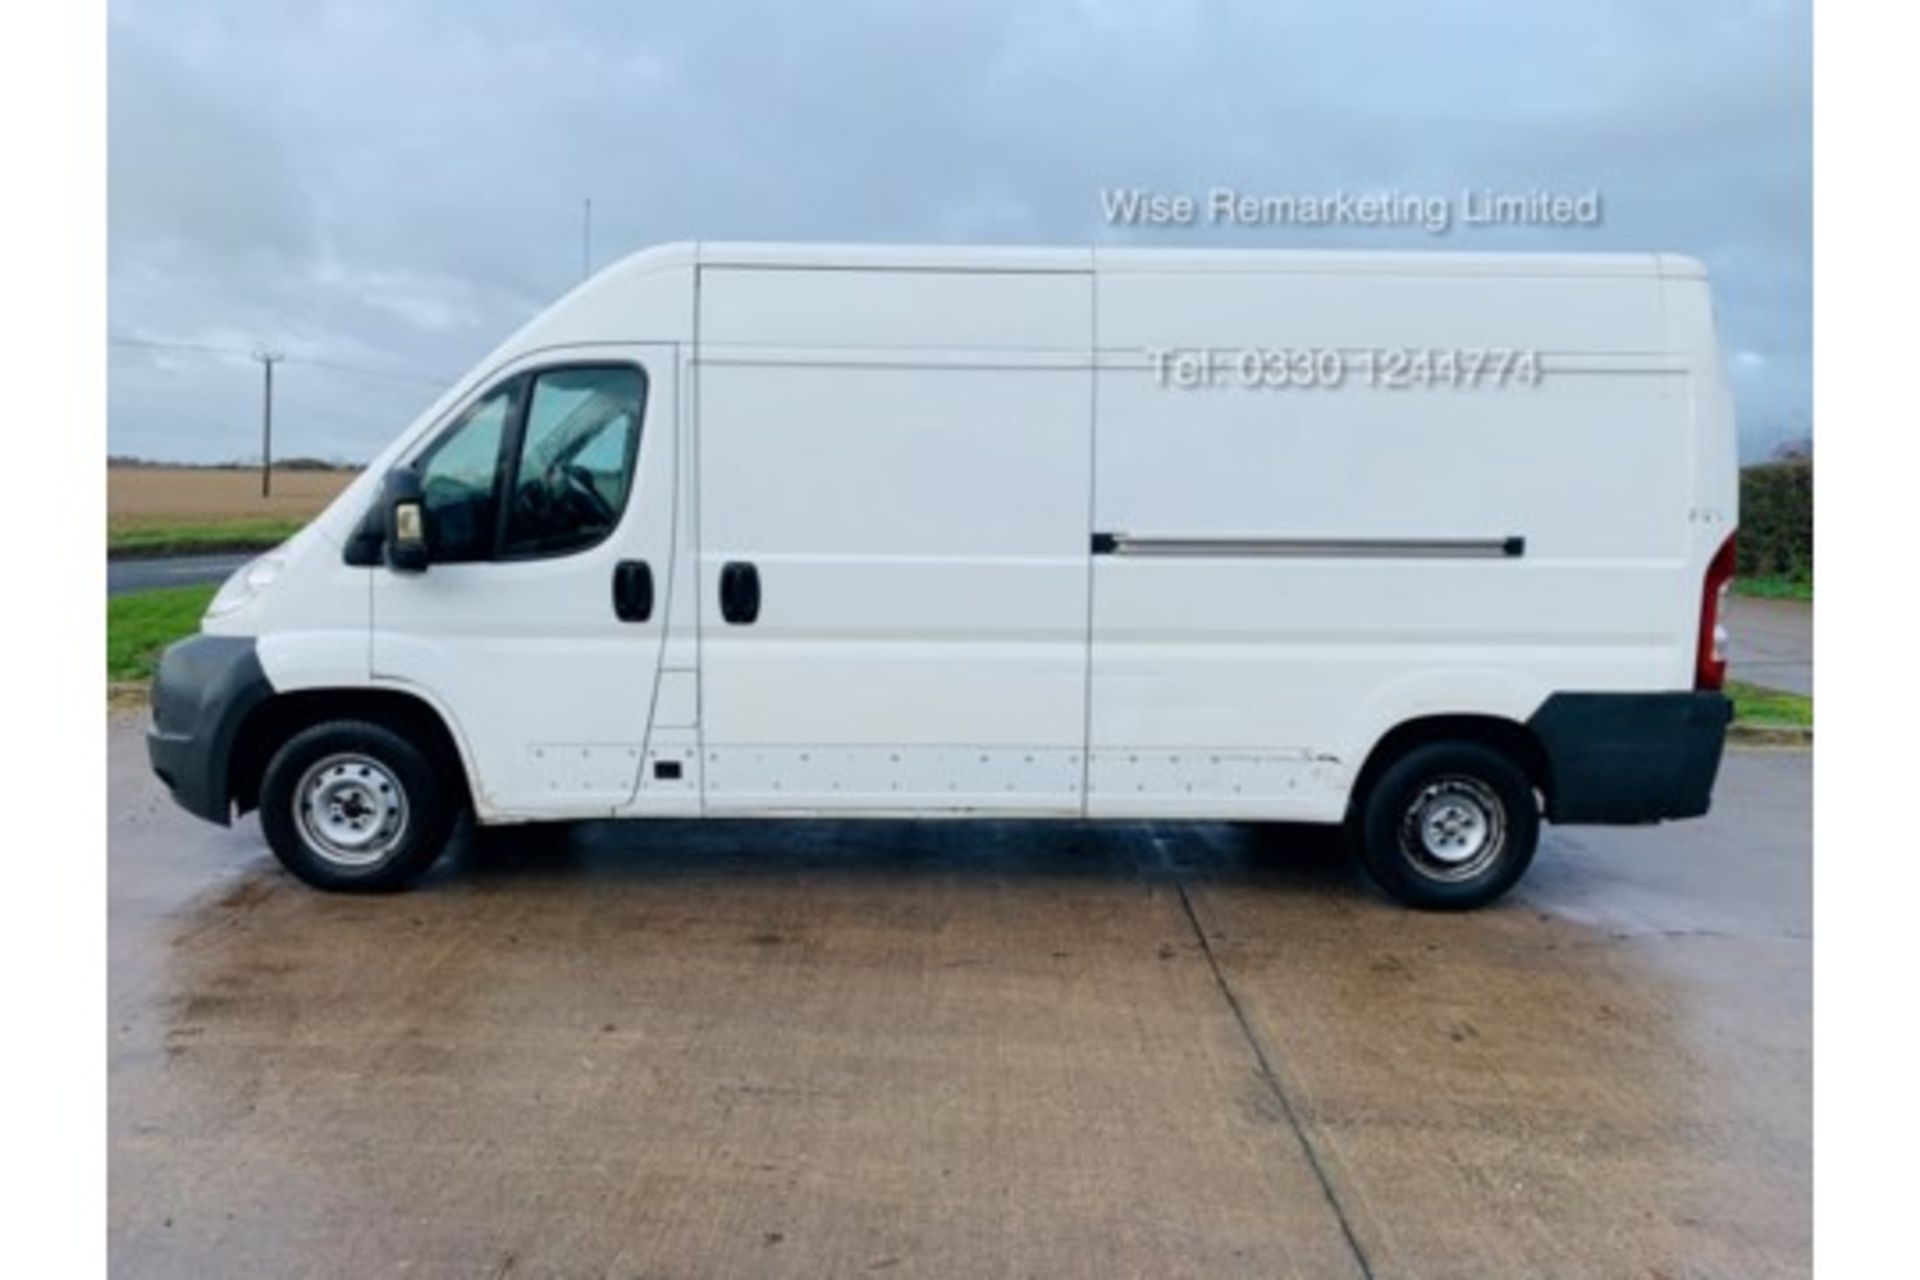 (RESERVE MET) Peugeot Boxer 335 2.2 HDi Long Wheel Base 2014 Reg - 1 Keeper From New - Image 2 of 17